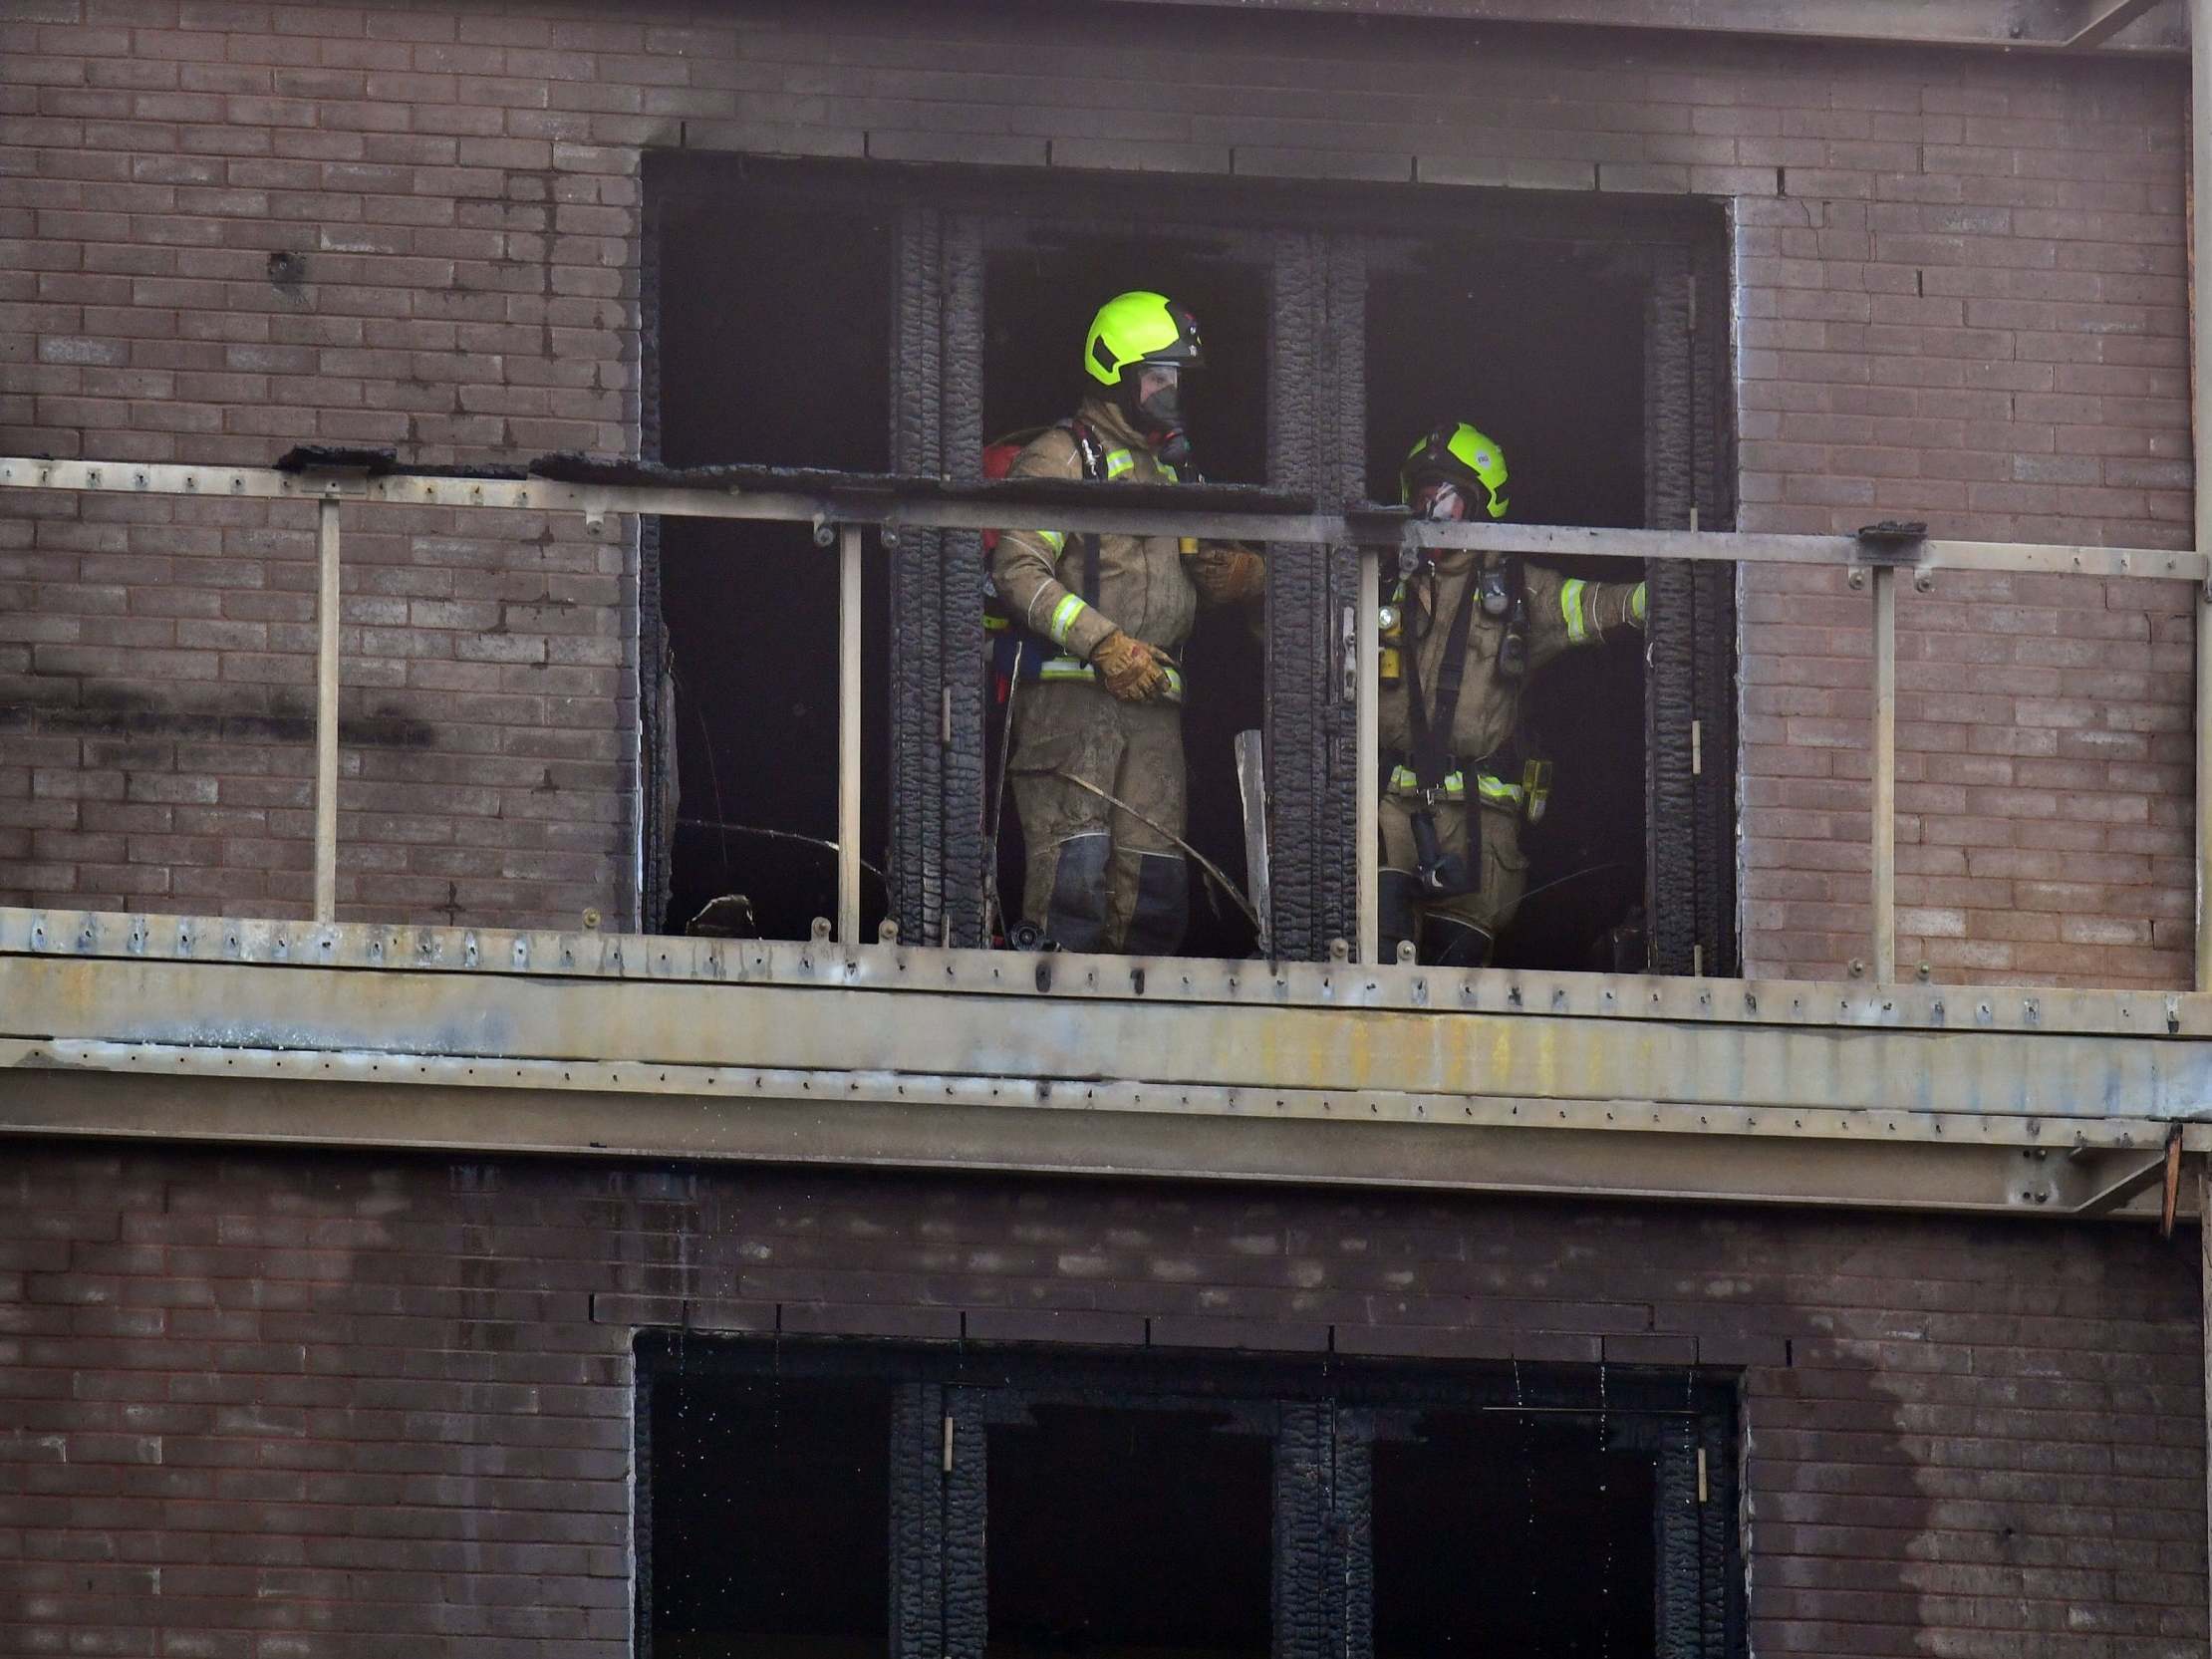 Firefighters deal with the blaze at a block of flats in Barking